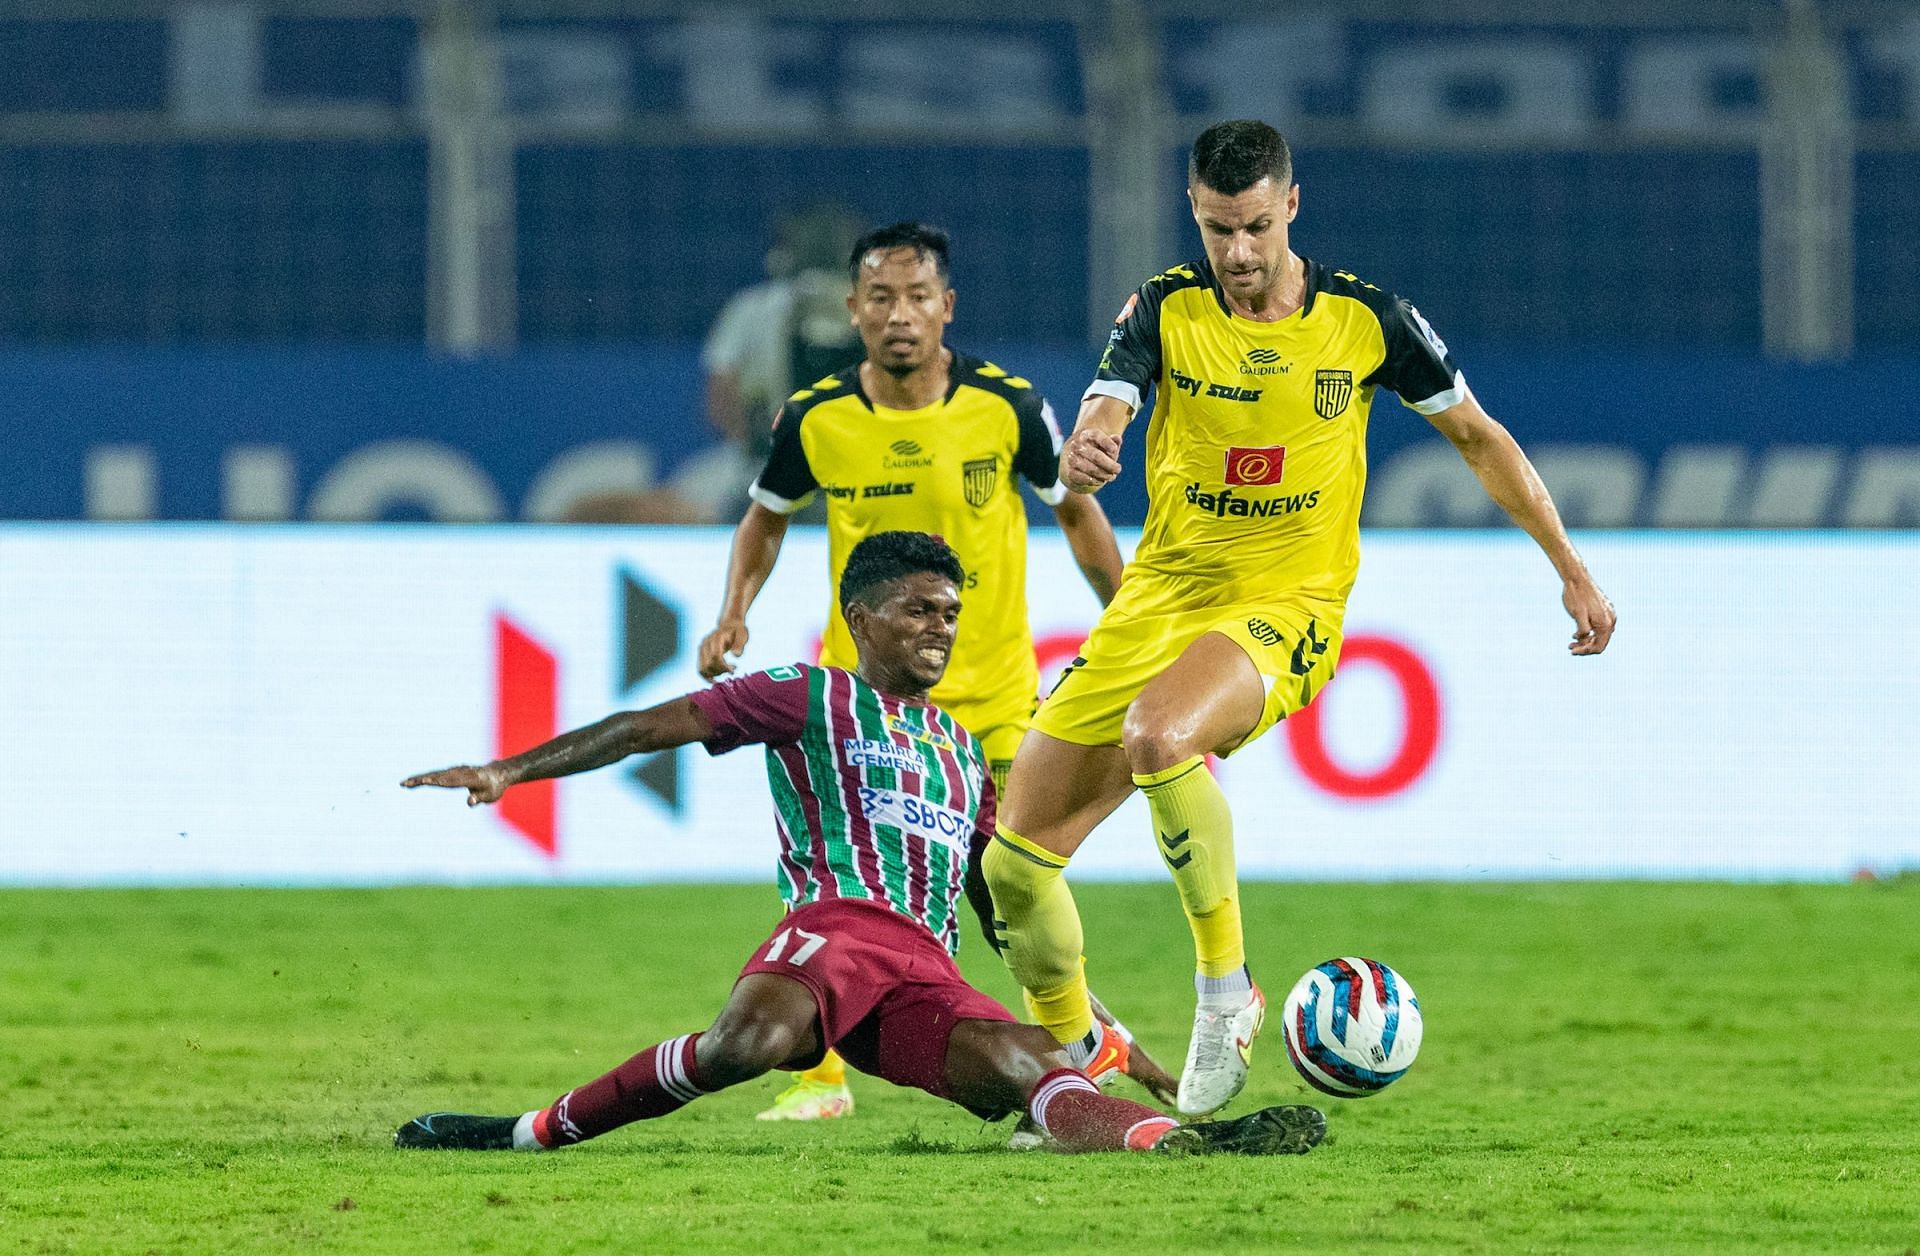 ATK Mohun Bagan and Hyderabad FC went toe-to-toe against each other in the previous leg (Image Courtesy: ISL)